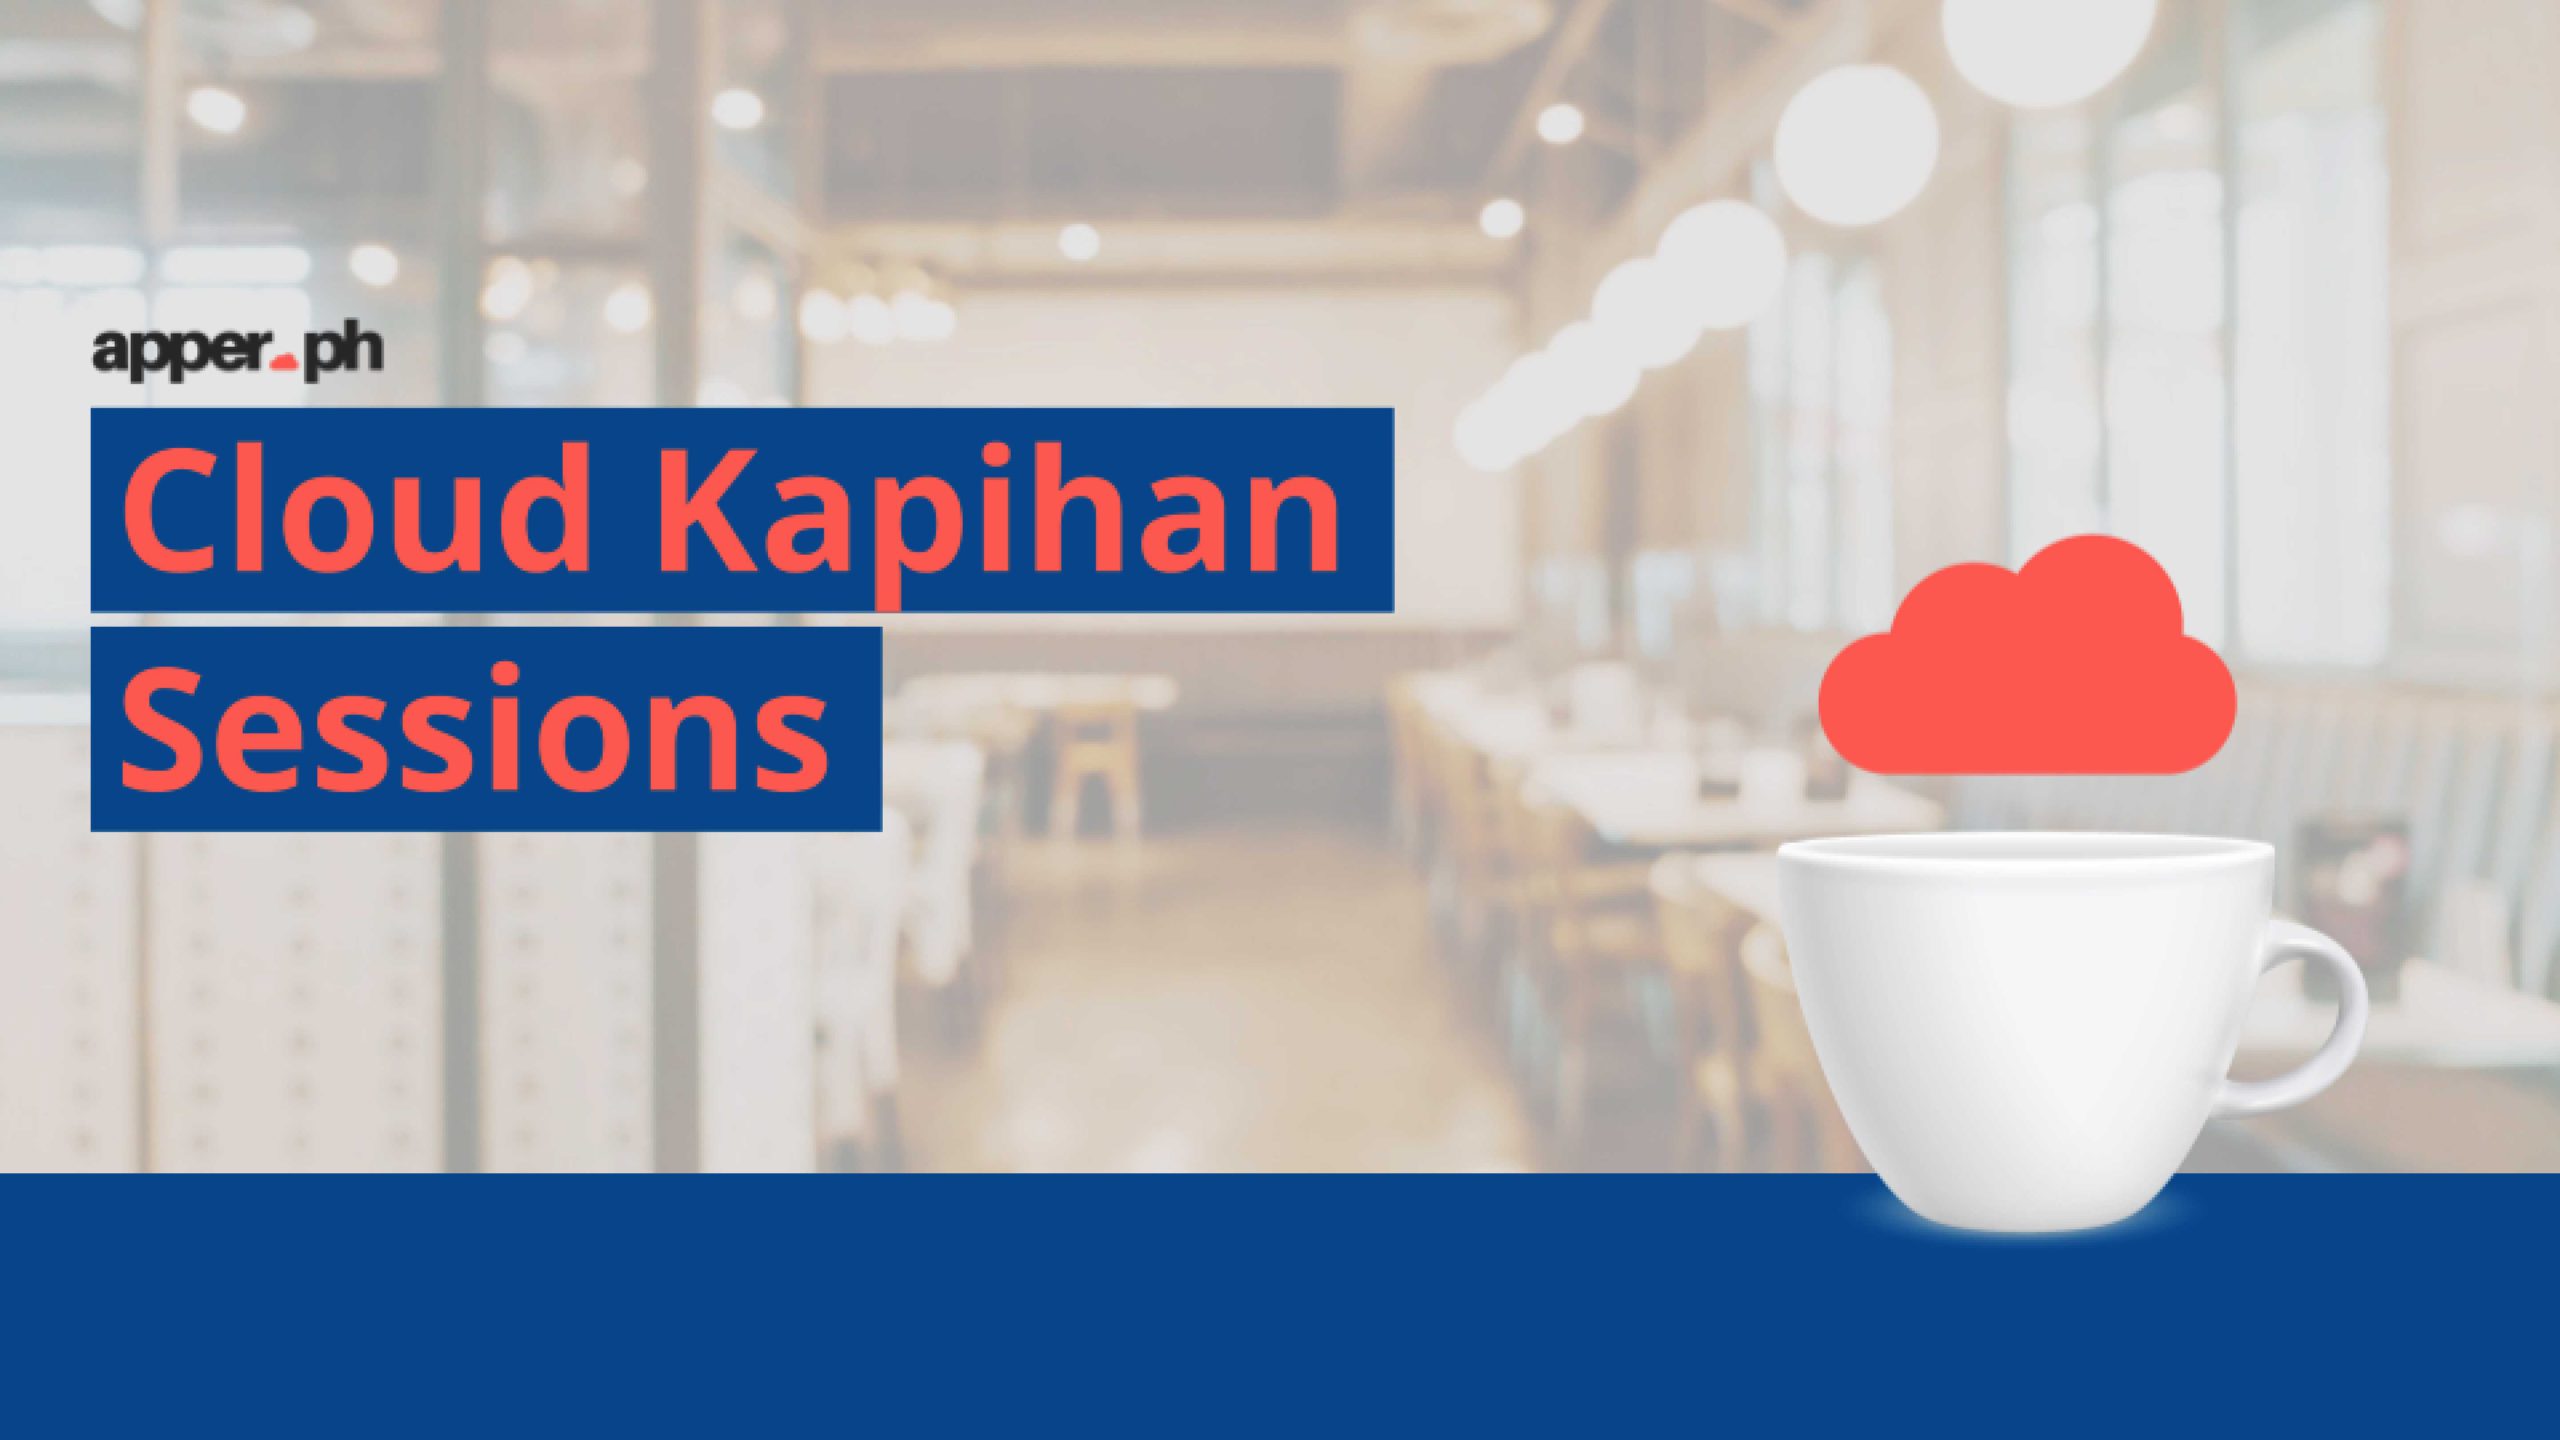 Coffee, IT Insights, Learnings: Cloud Kapihan Sessions with the Apper Team